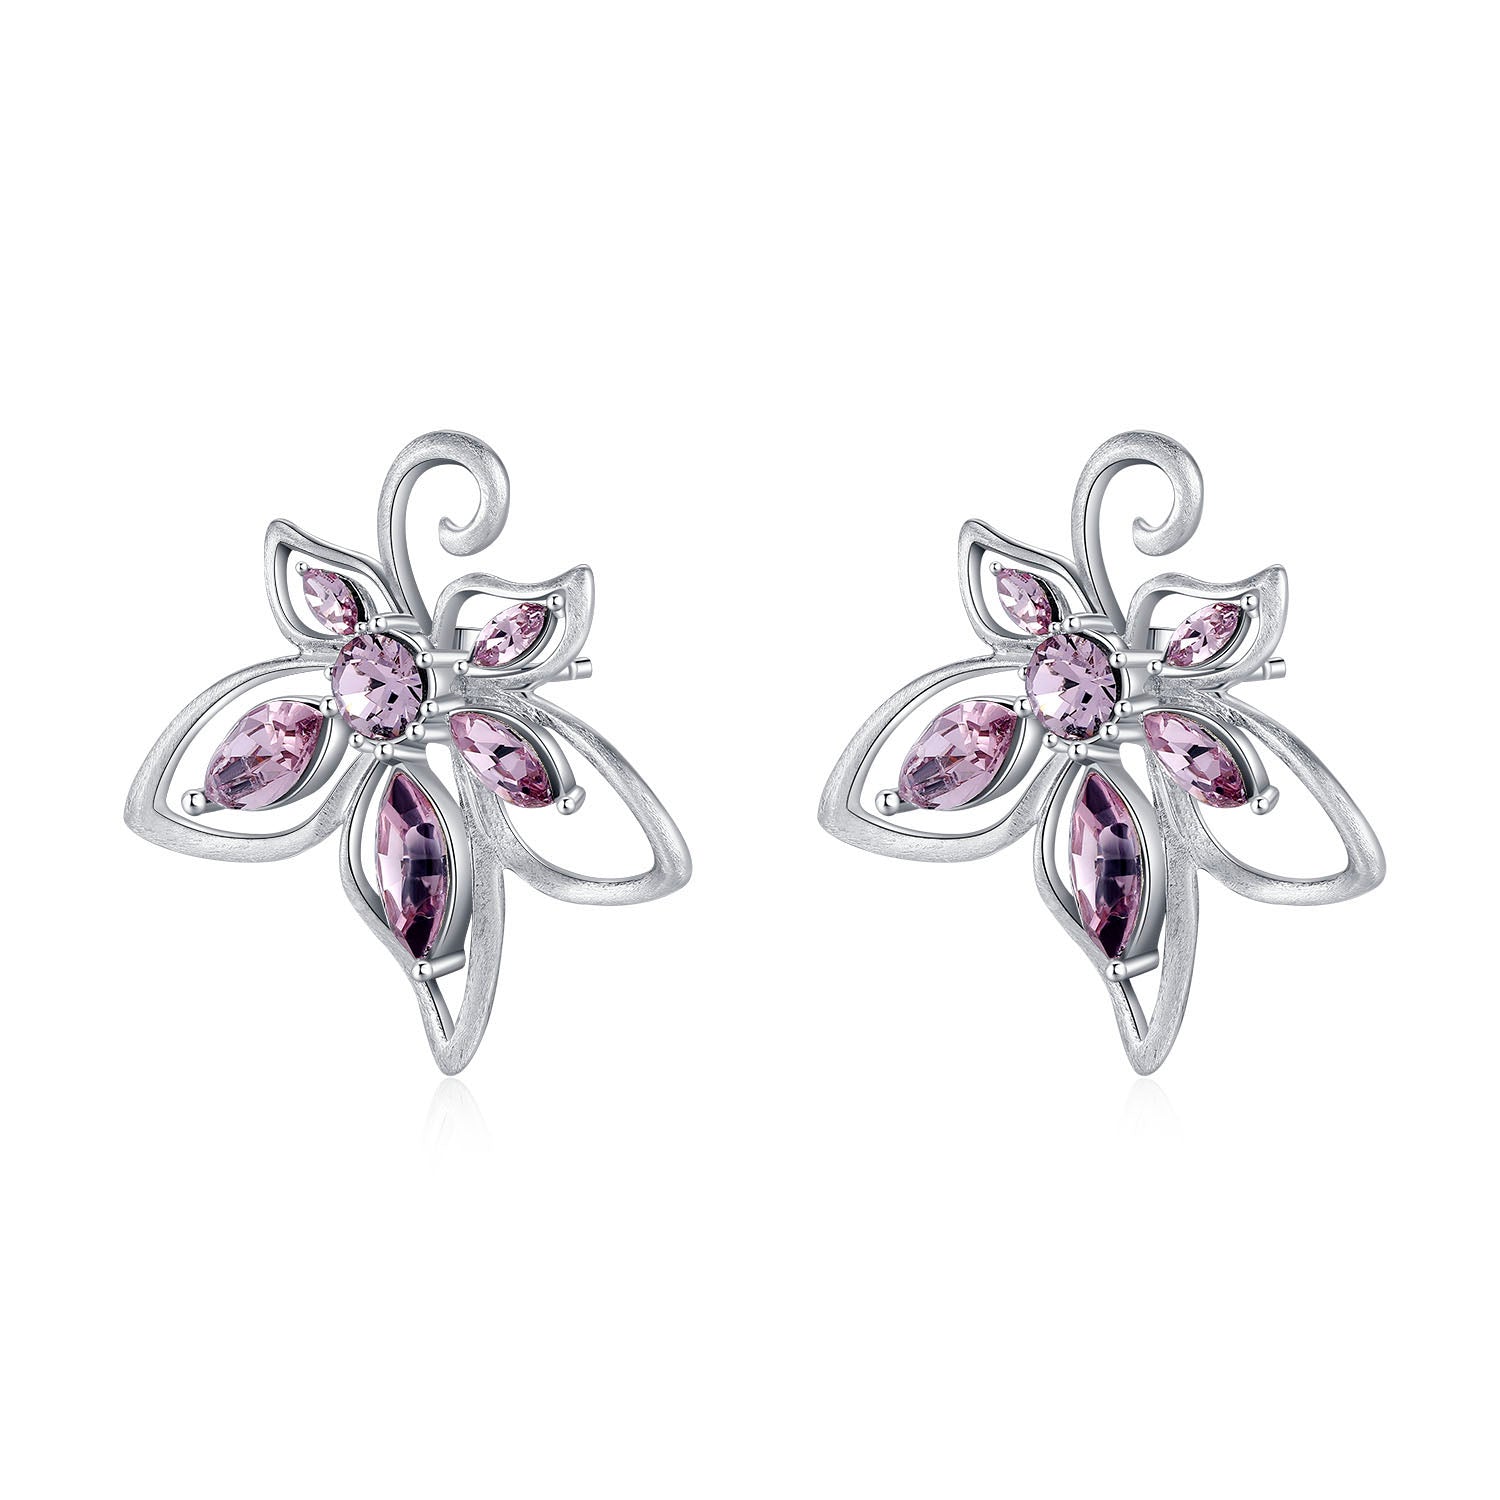 Vicacci 925 Silver Bauhinia Earrings with Swarovski Amethysts